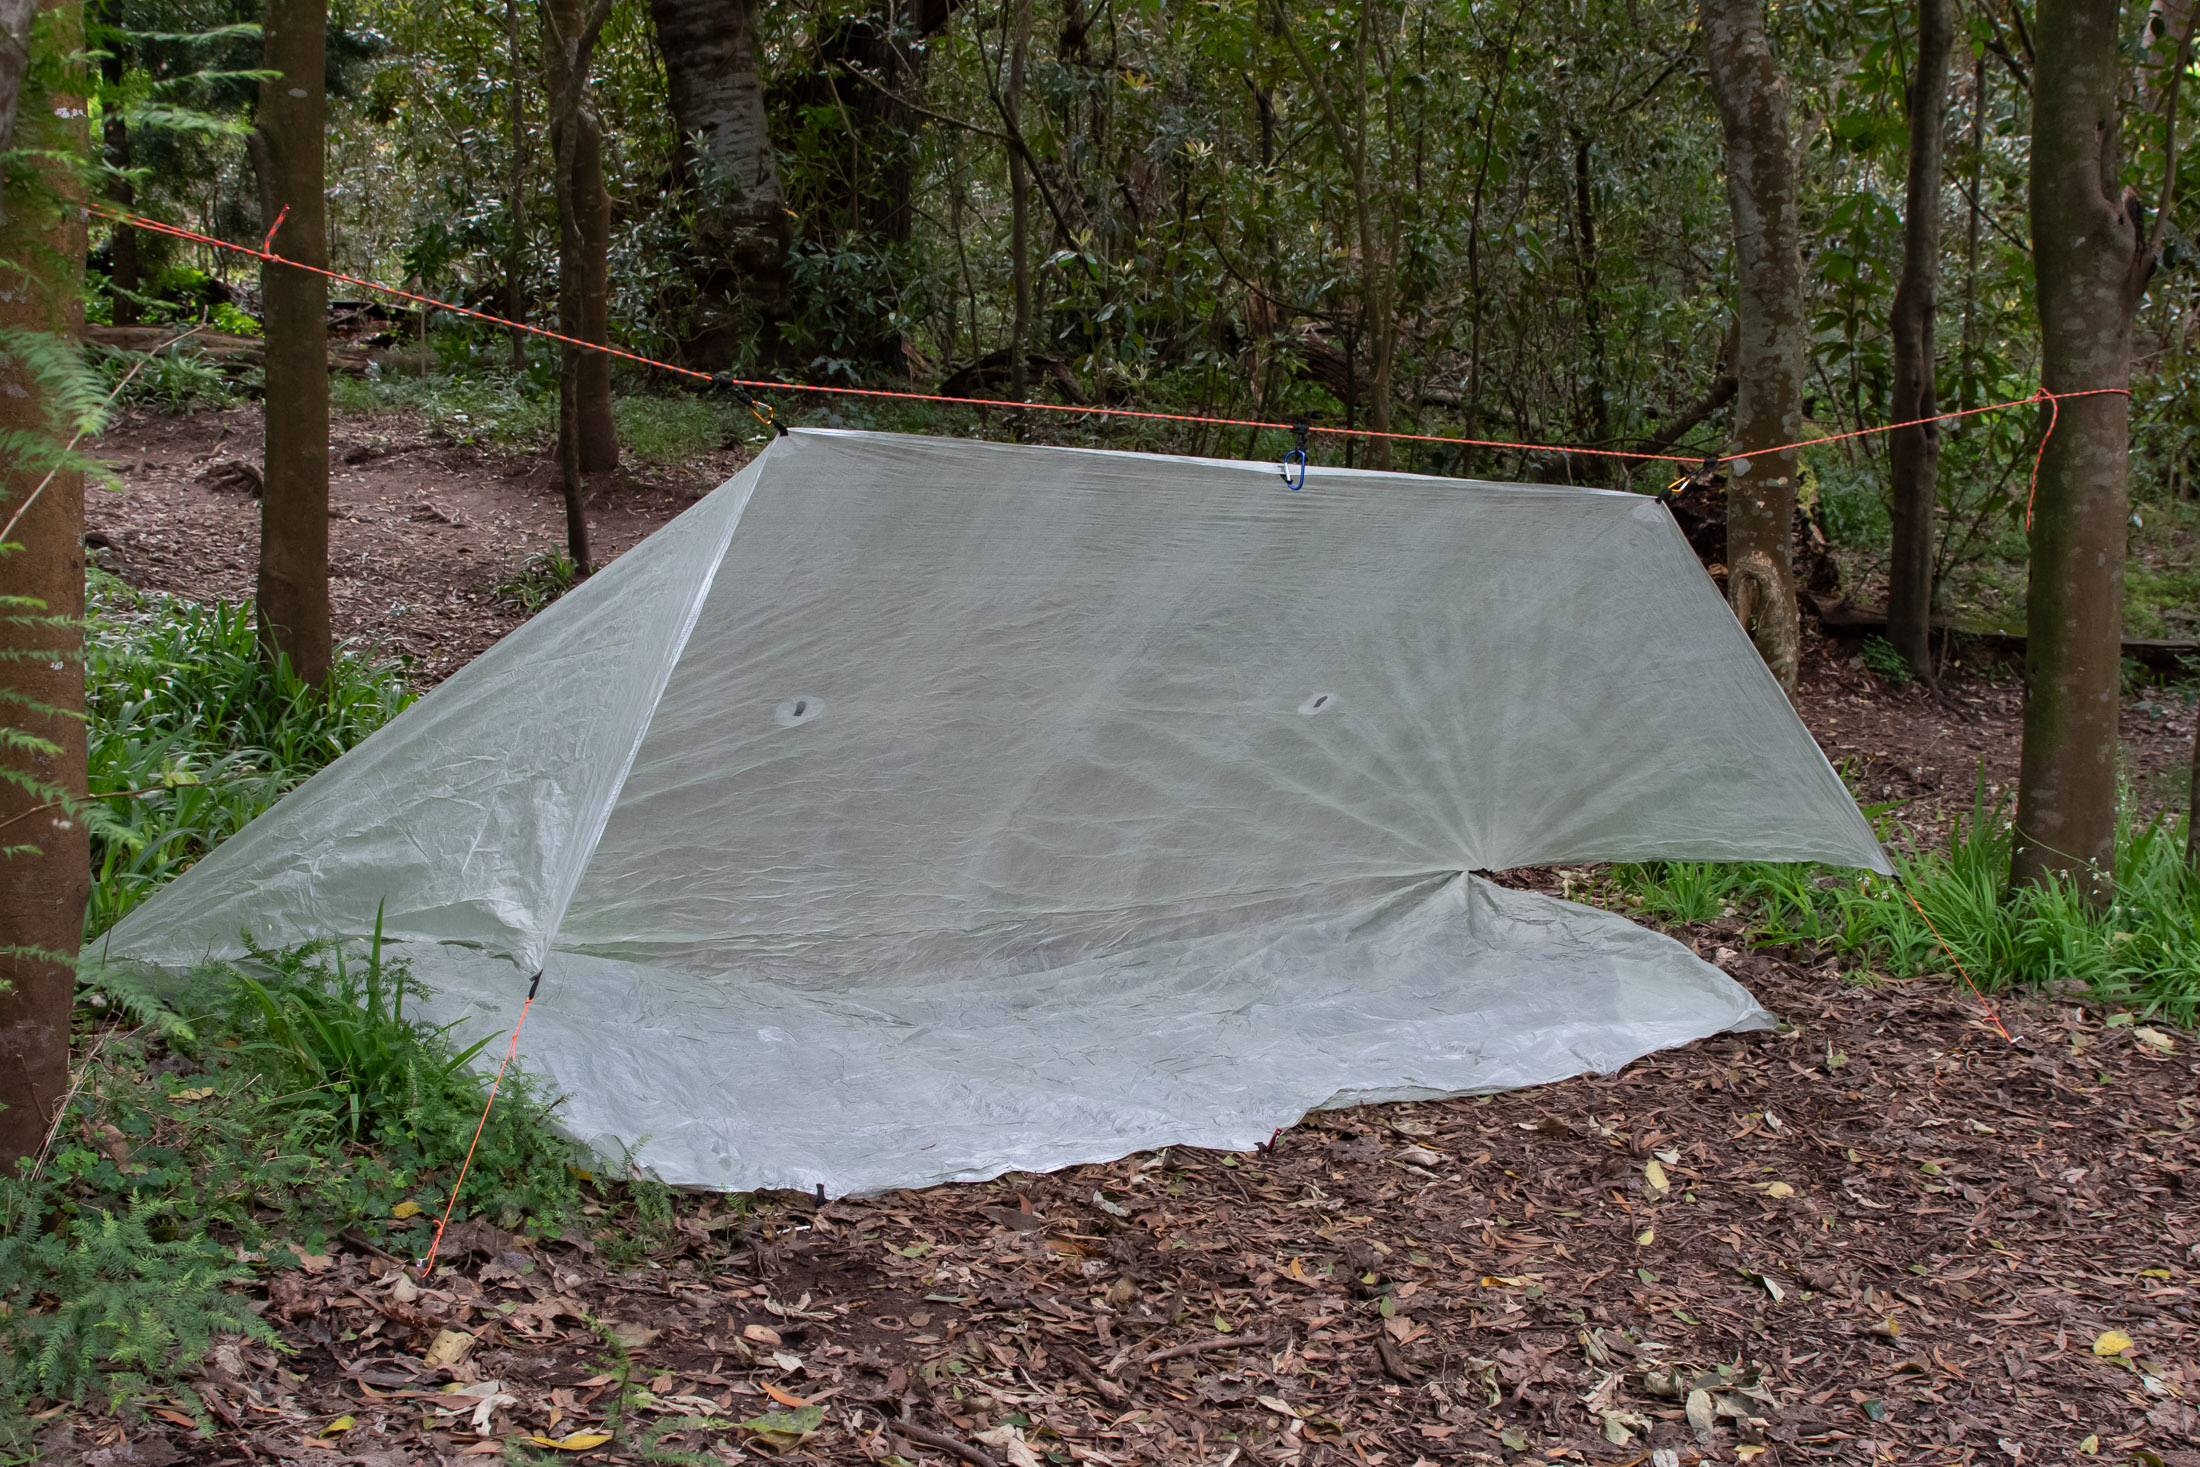 tarp rigged in stealth configuration